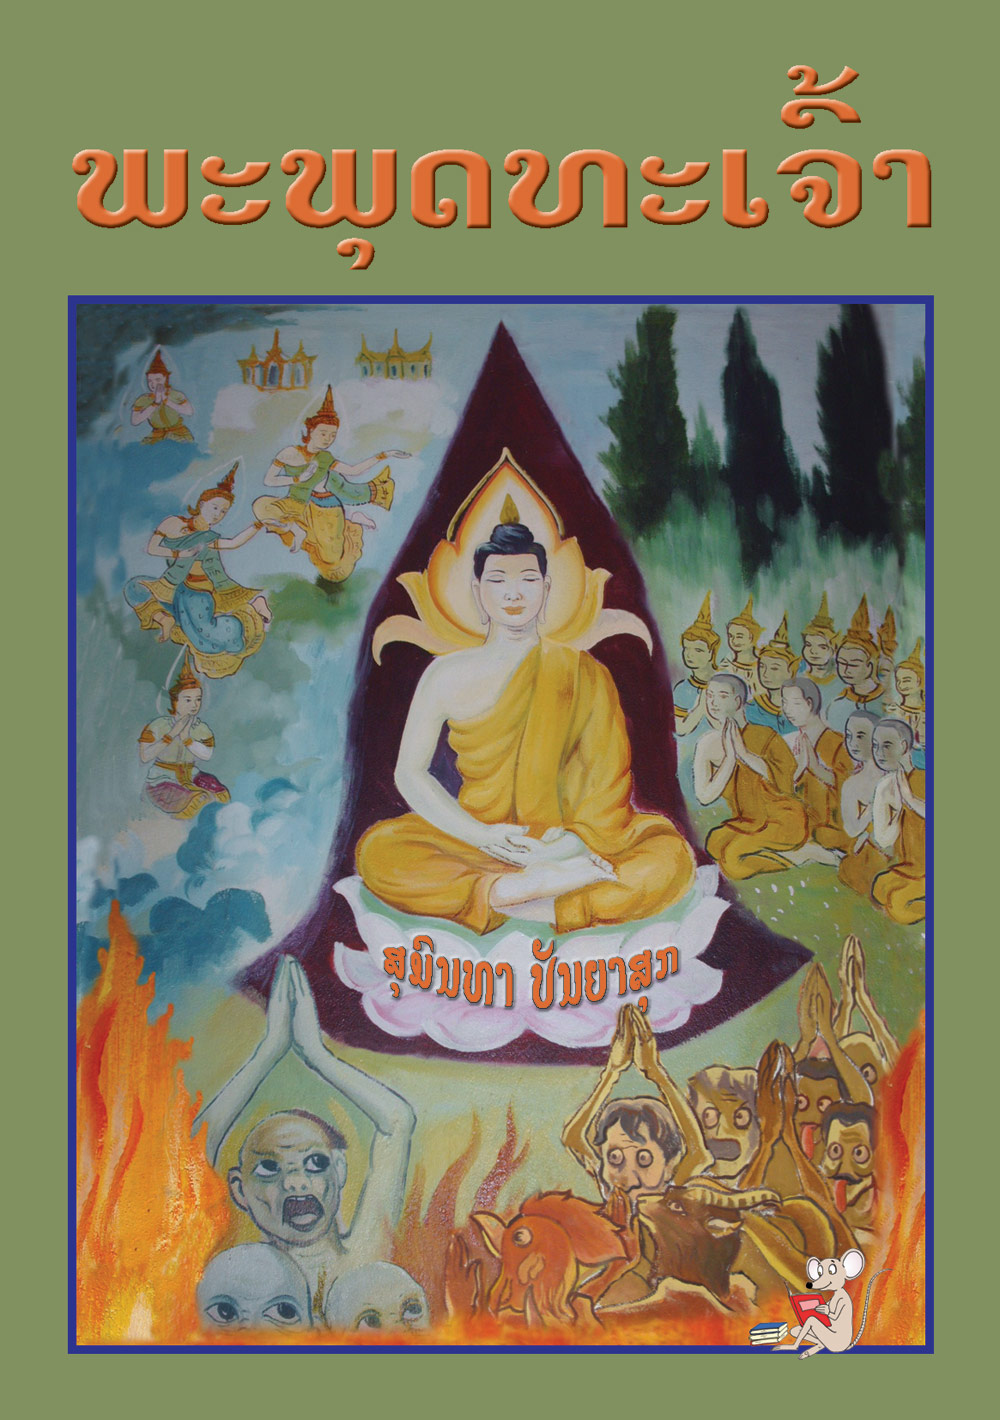 The Life of Buddha large book cover, published in Lao language